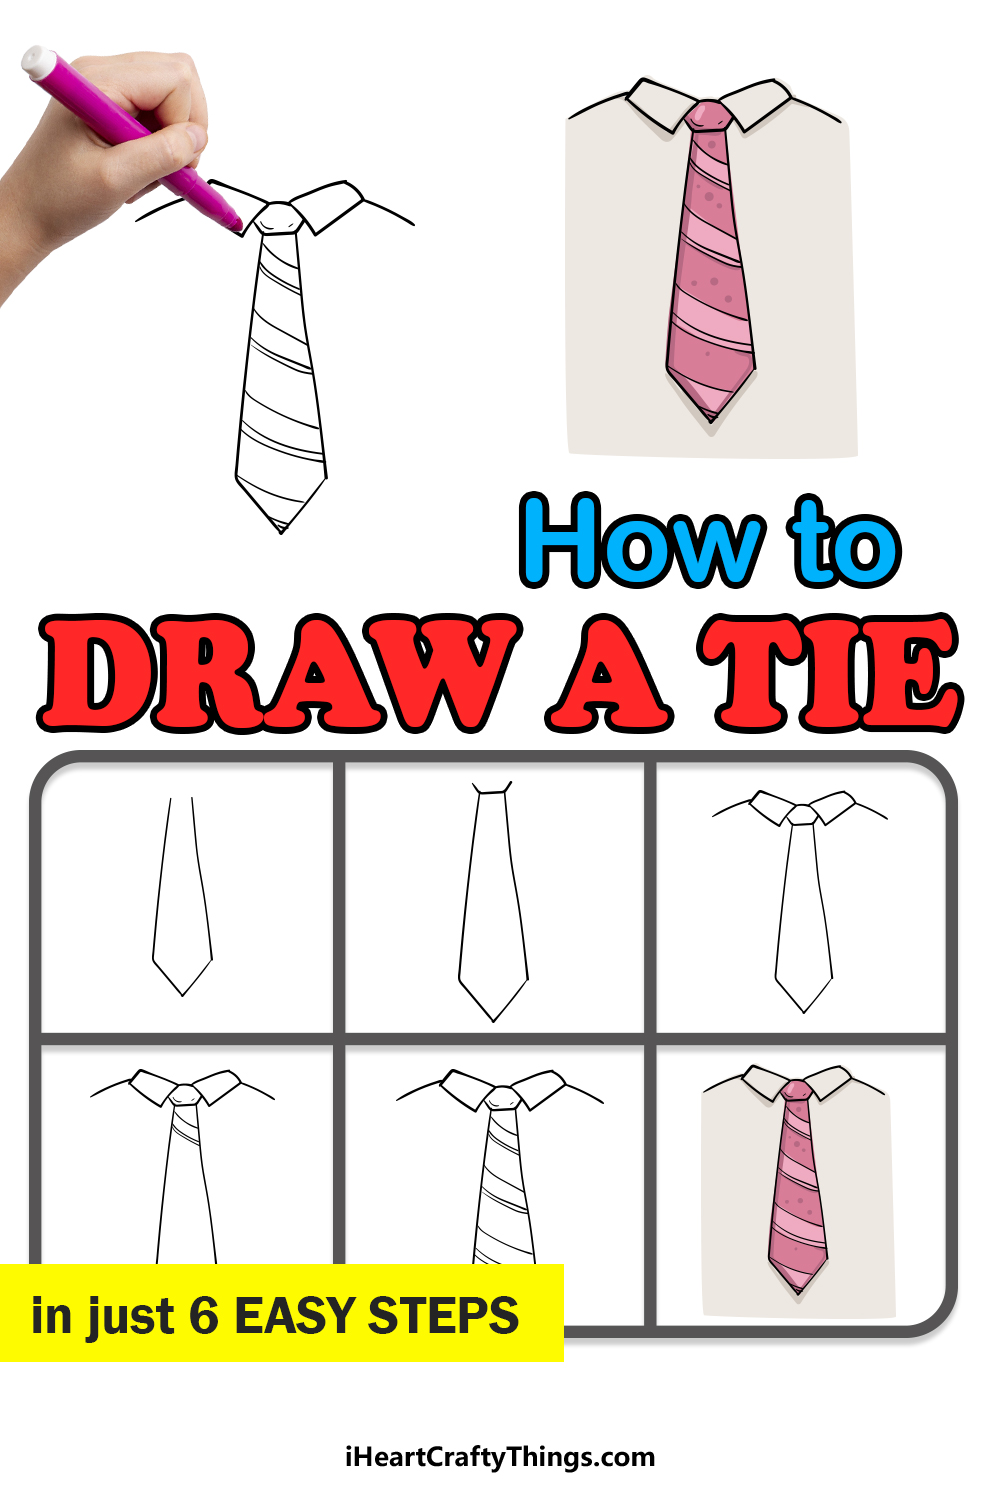 how to draw a tie in 6 easy steps